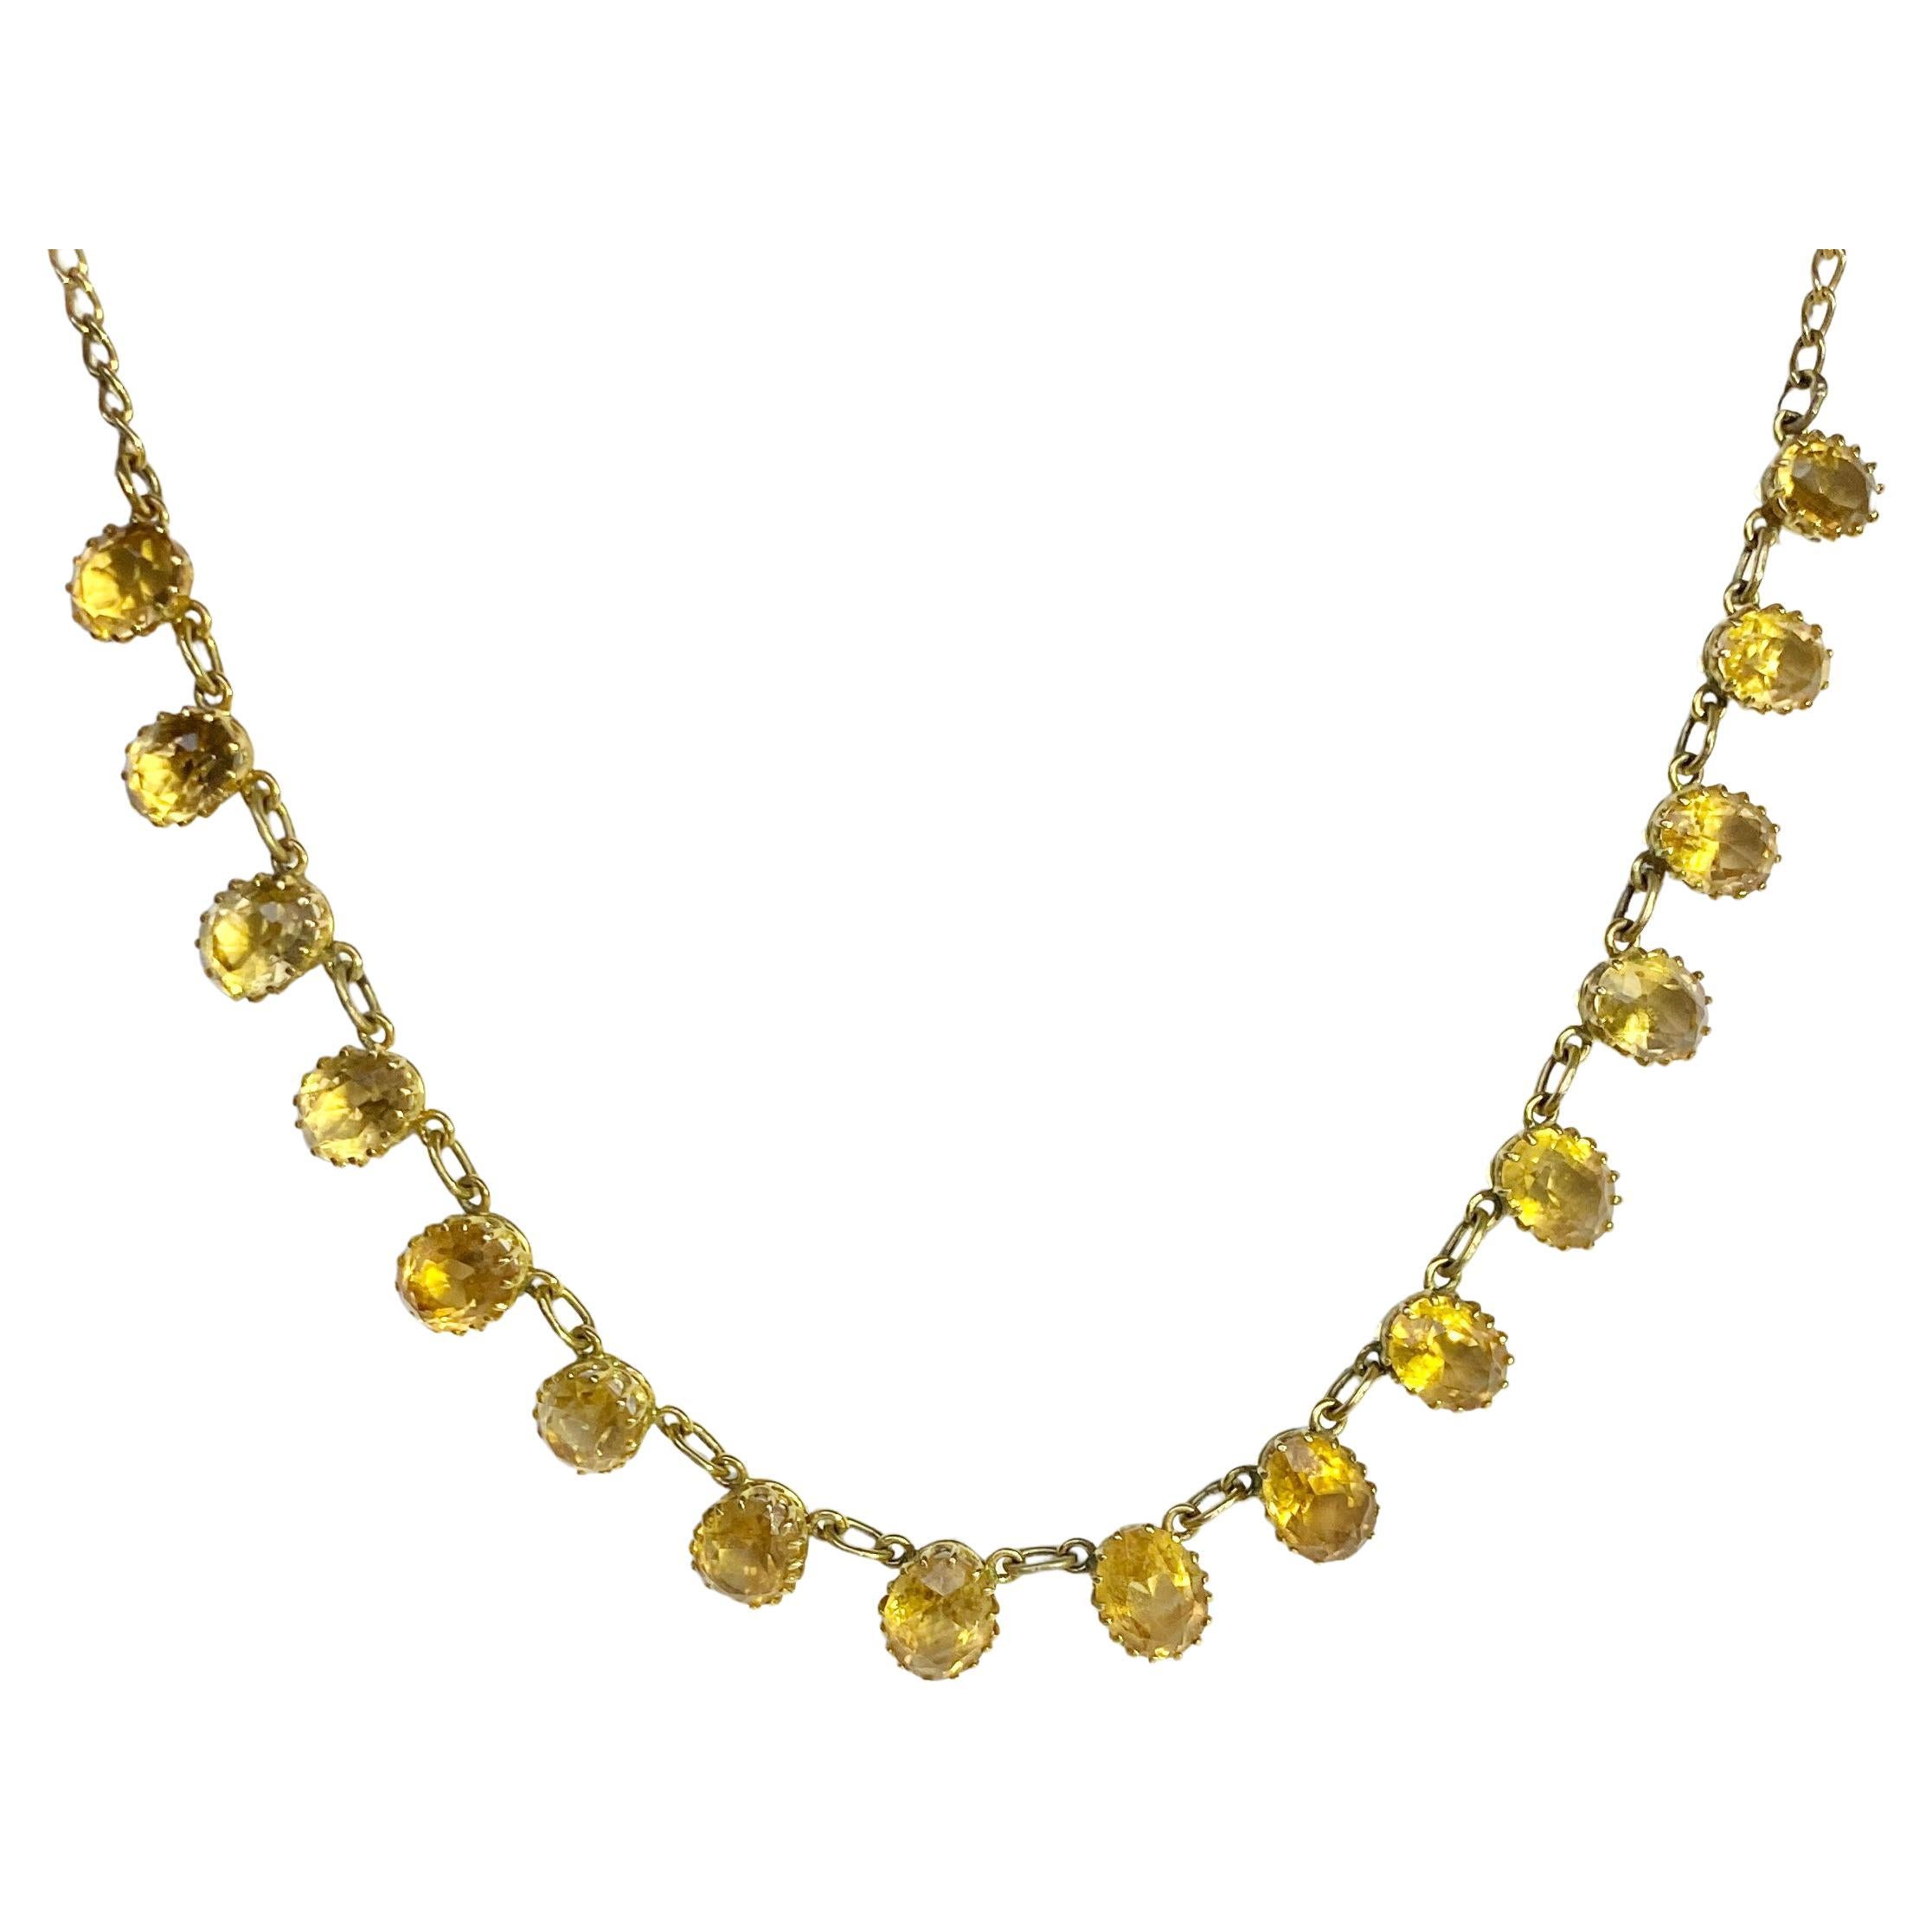 Art Deco Citrine and 18 Carat Gold Rivière Necklace and Earrings